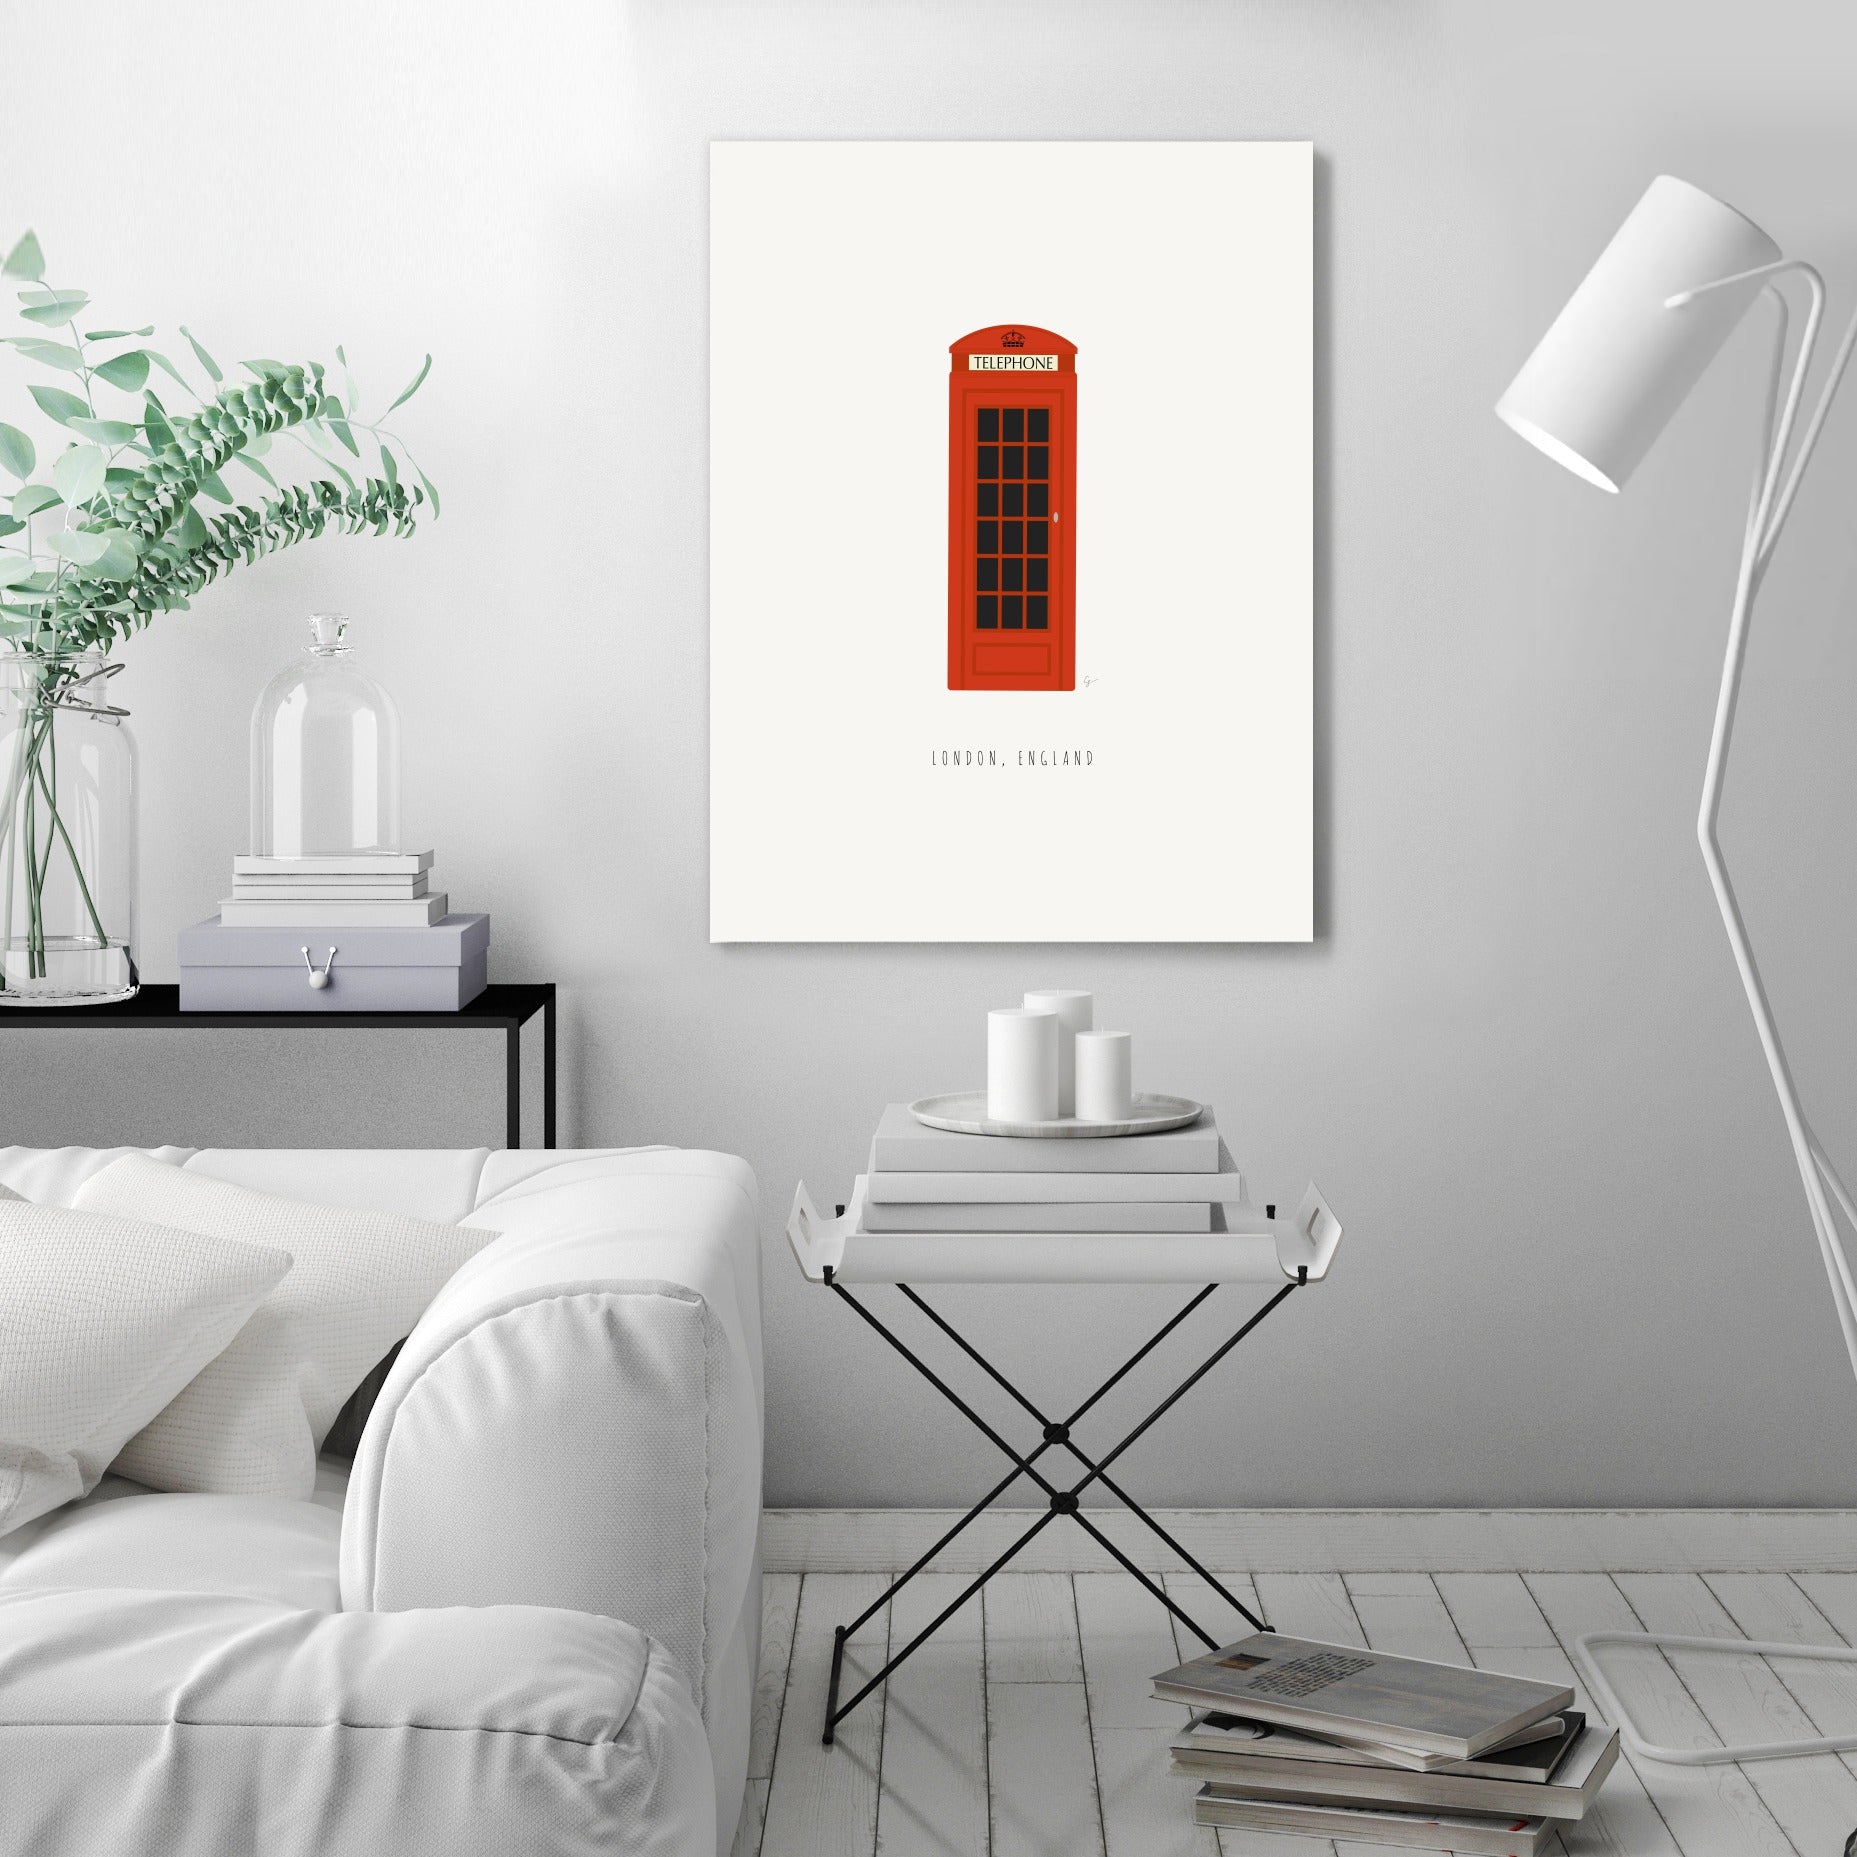 London Phone Booth by Lyman Creative Co - Wrapped Canvas - Wrapped Canvas - Americanflat